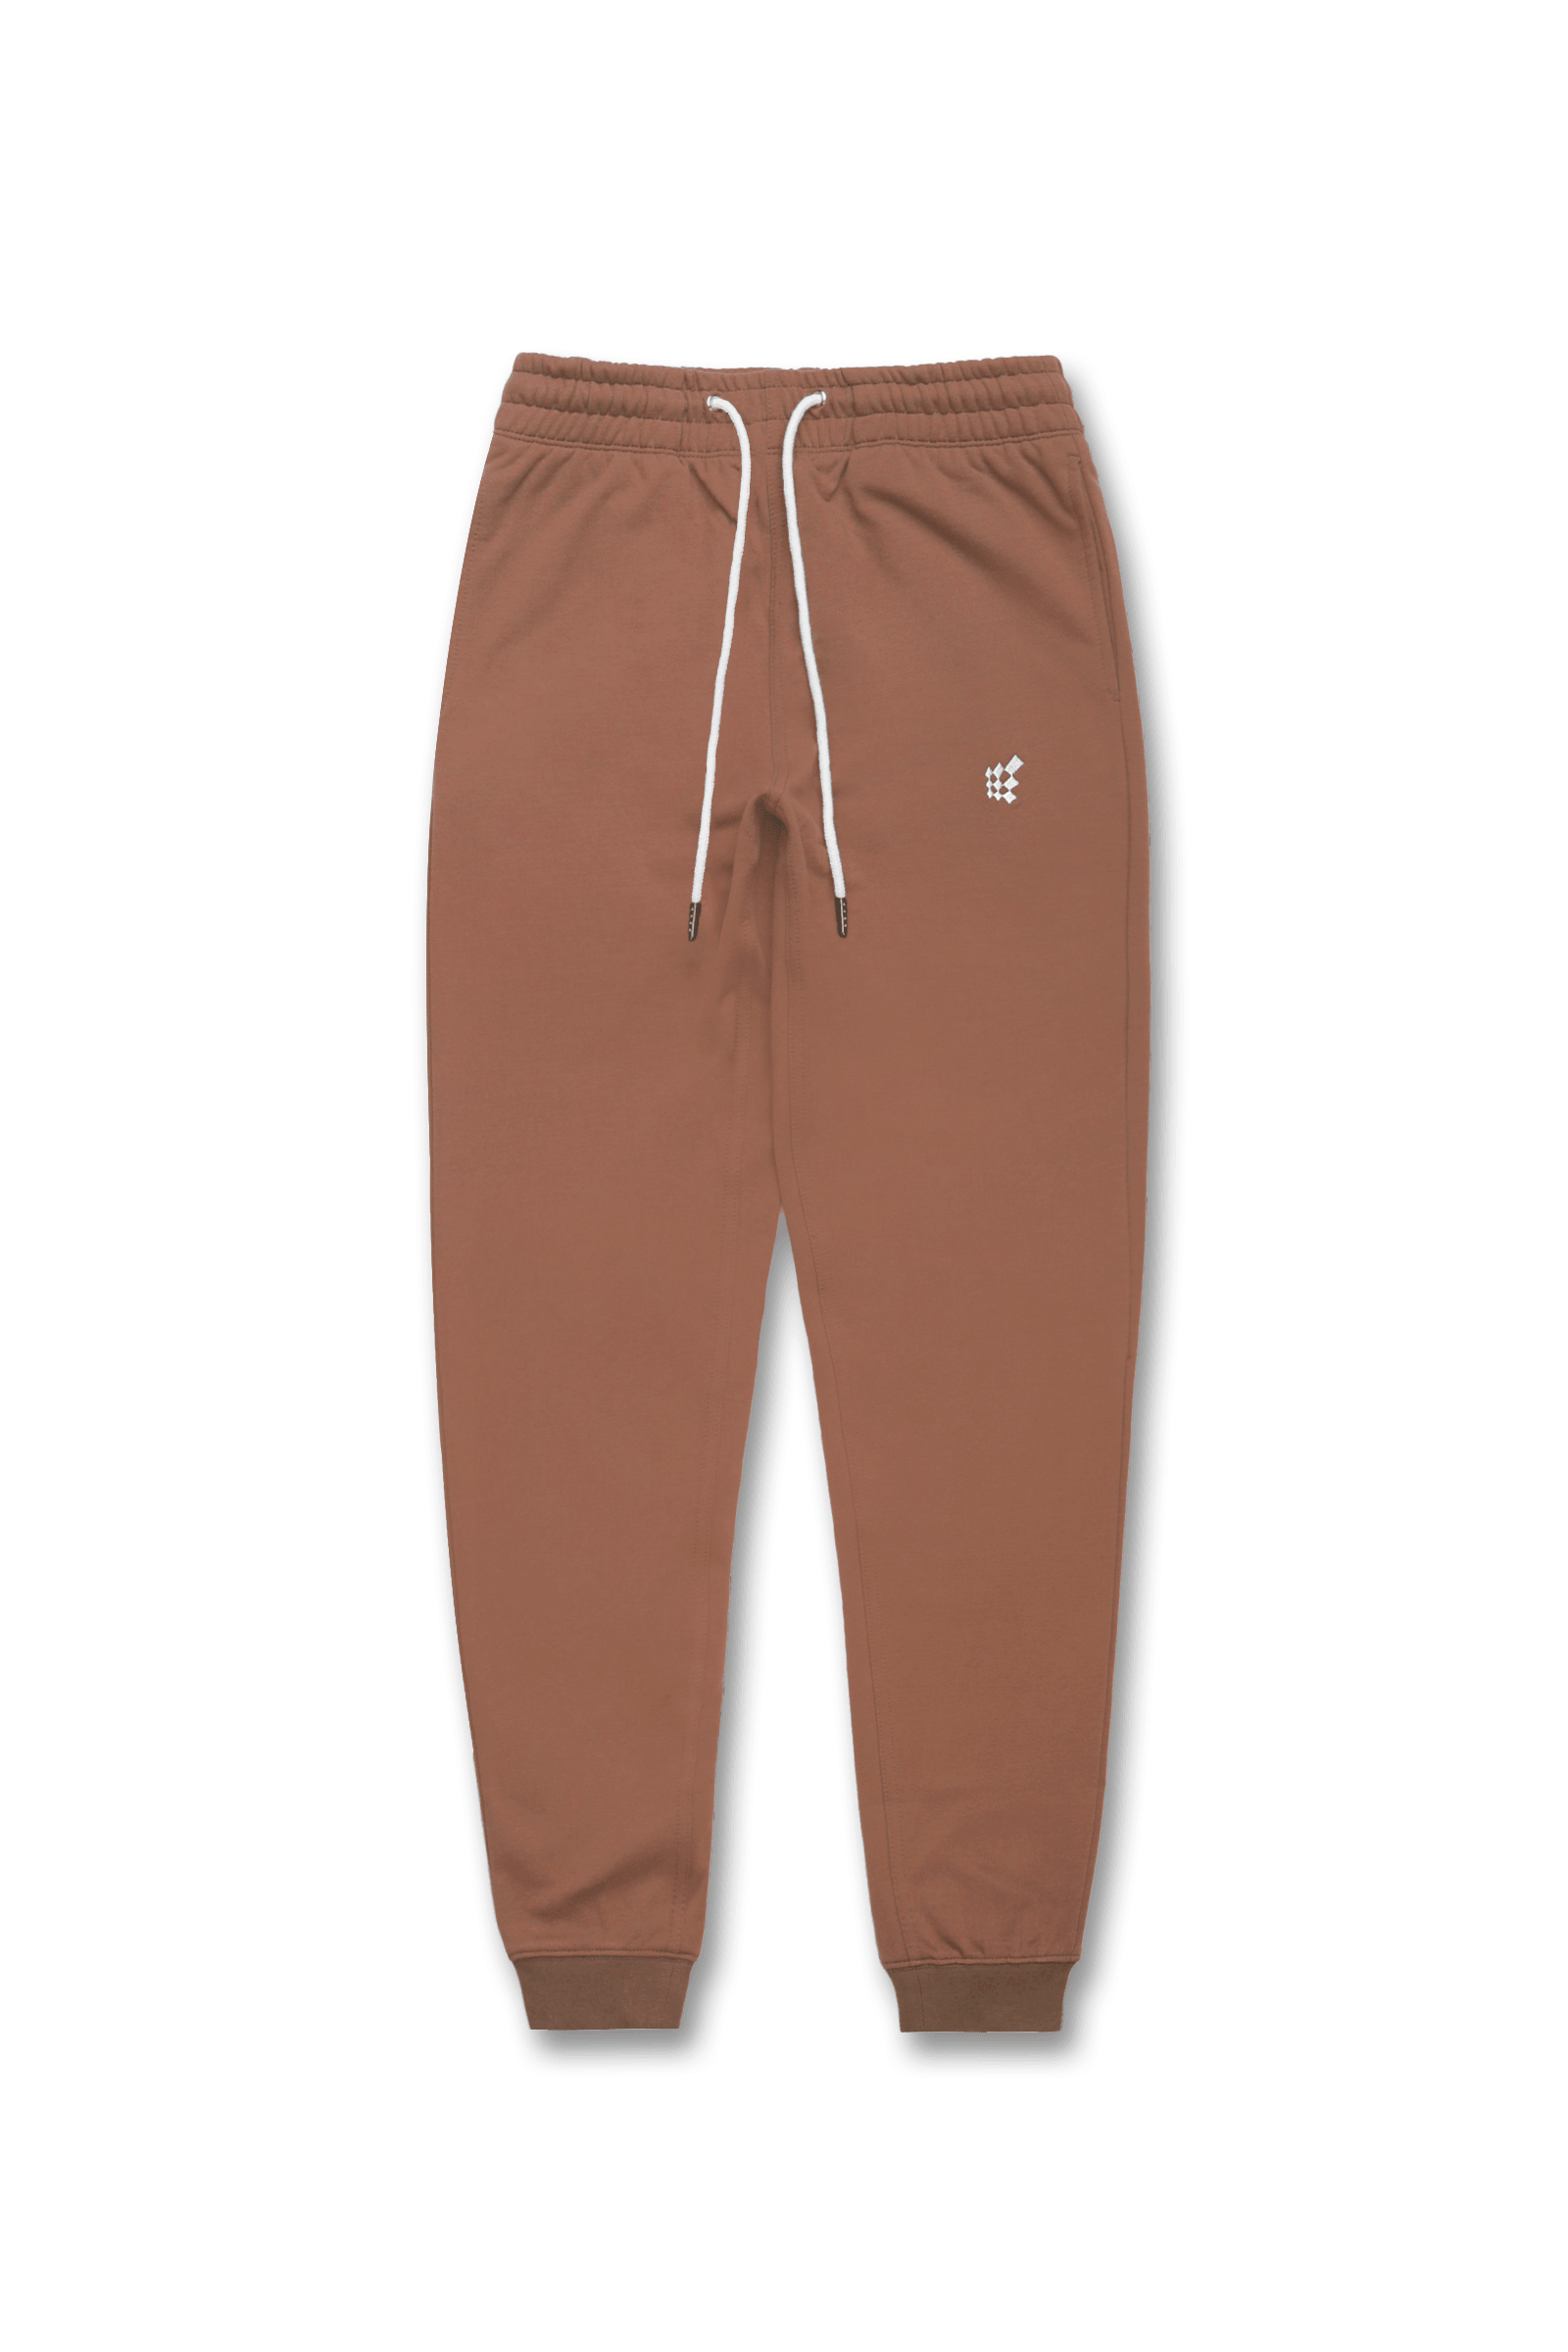 Spirit Joggers - Brown - Jed North